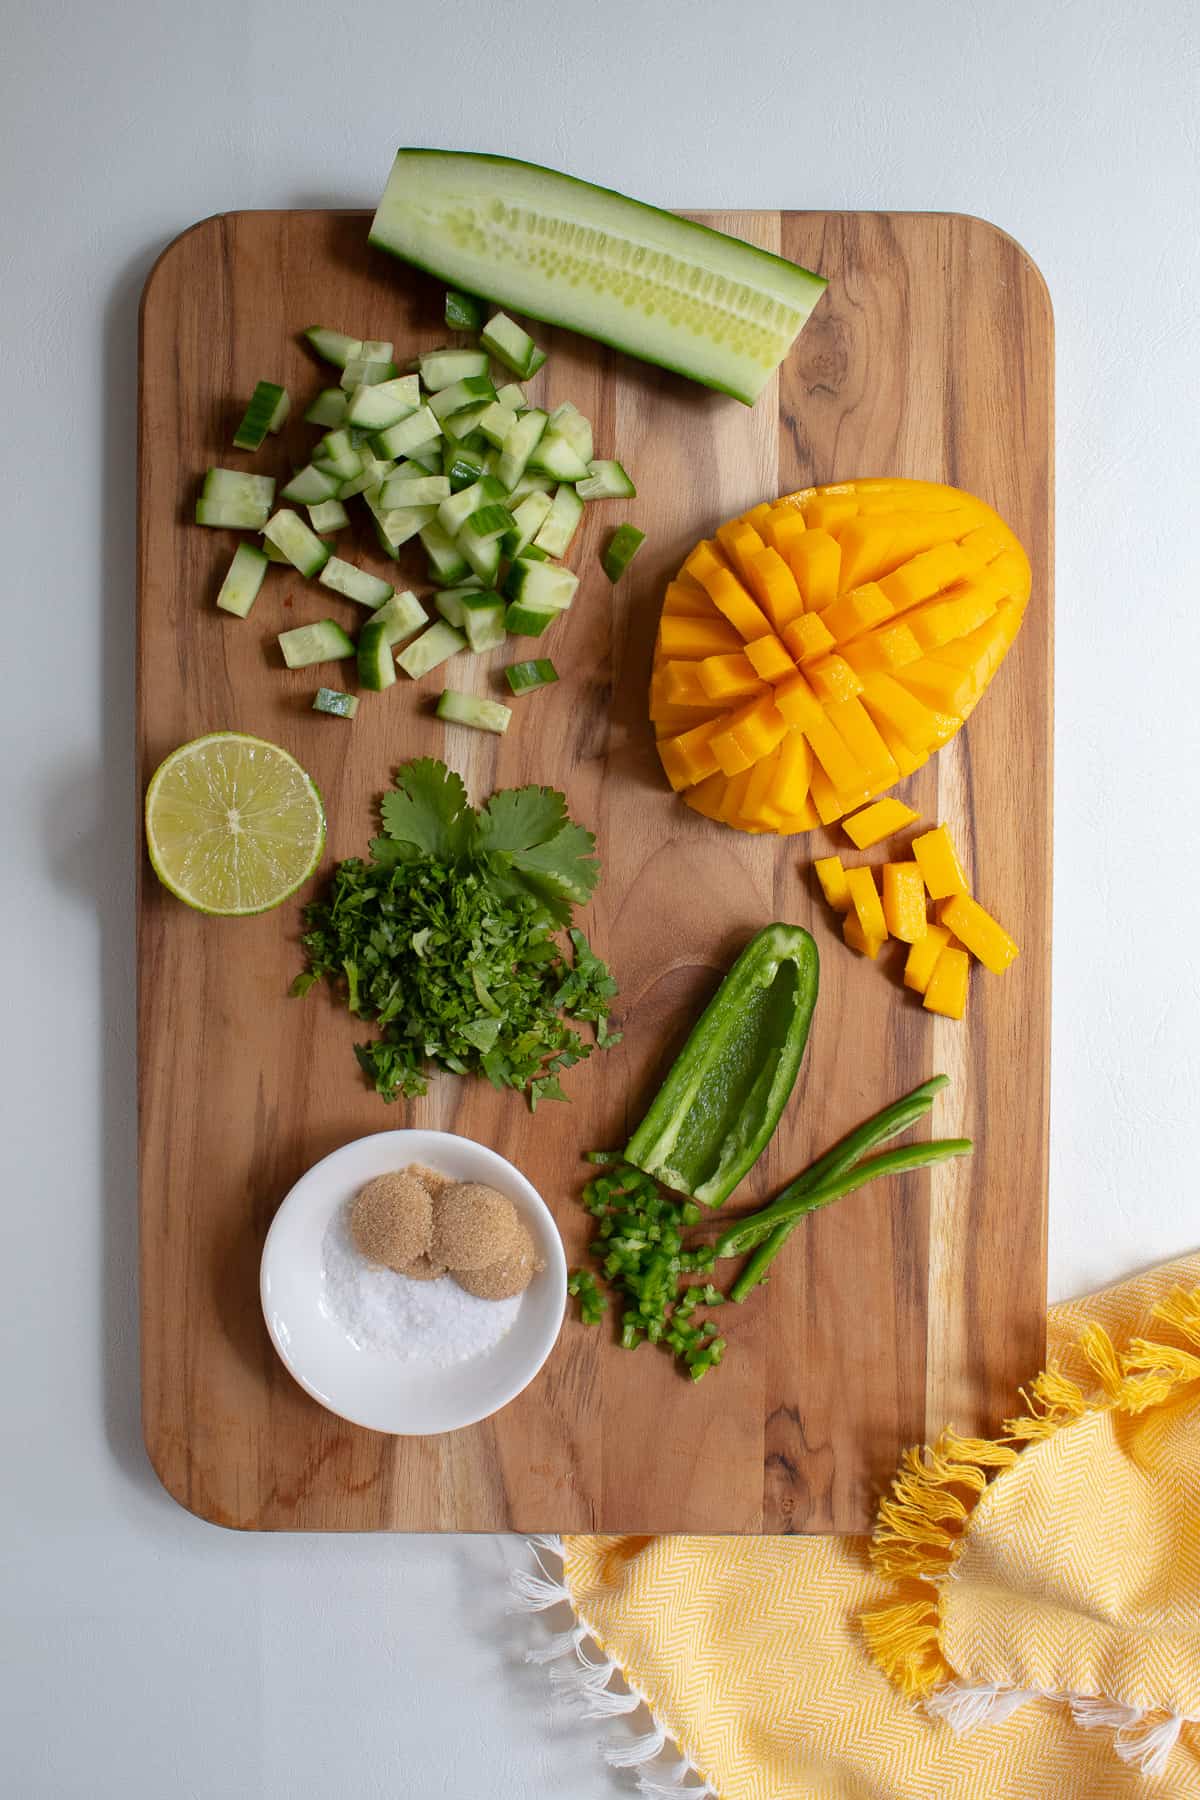 Ingredients for the mango cucumber salad are diced and arranged on a wooden cutting board.